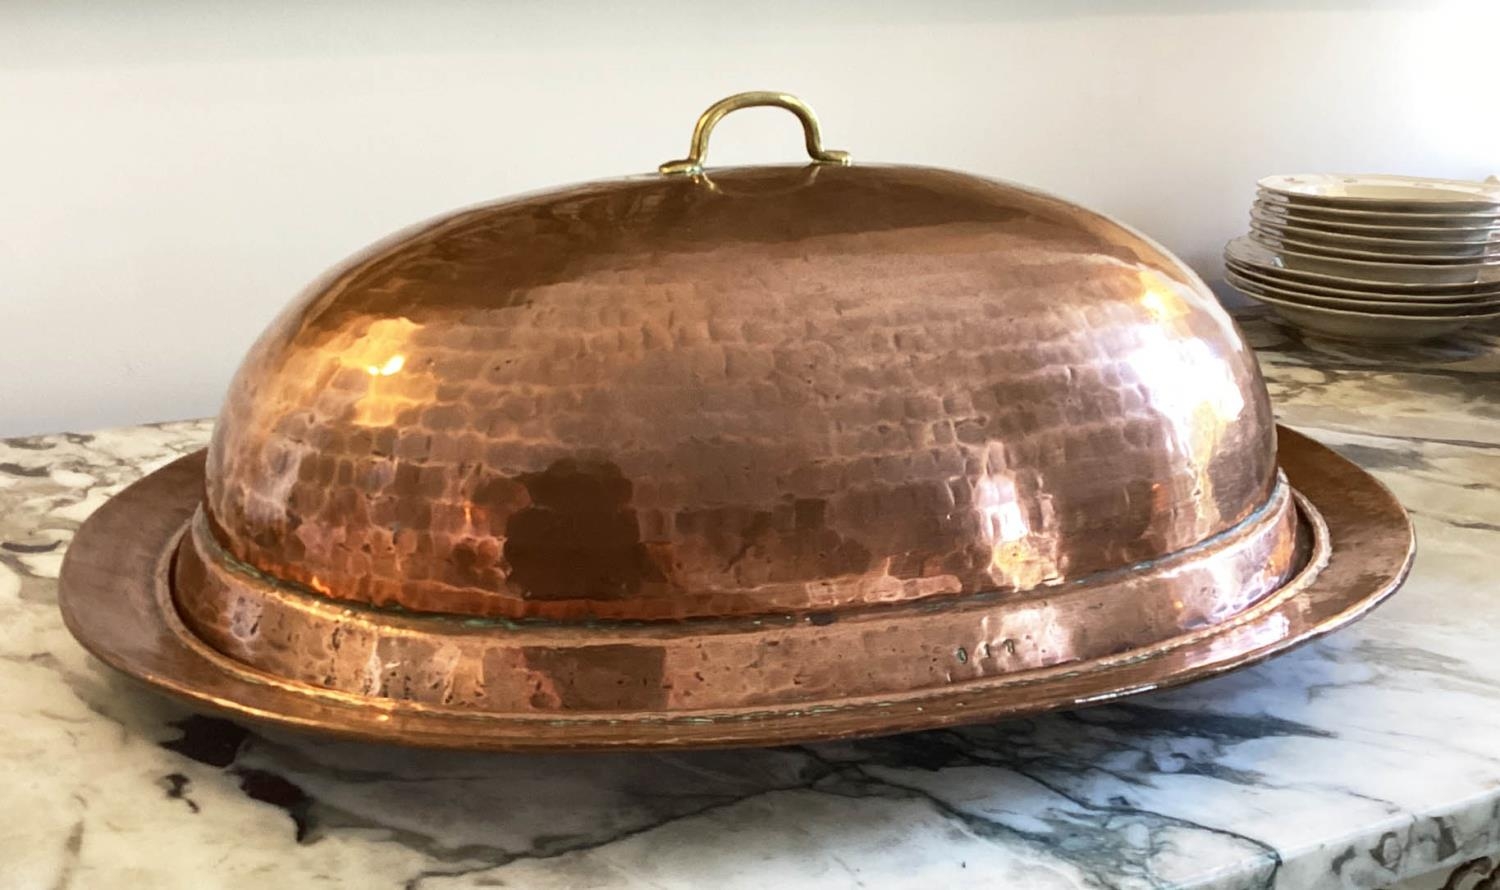 MEAT PLATE AND COVER, early 20th century hand beaten copper oval plate with cover tamped to plate - Image 3 of 5